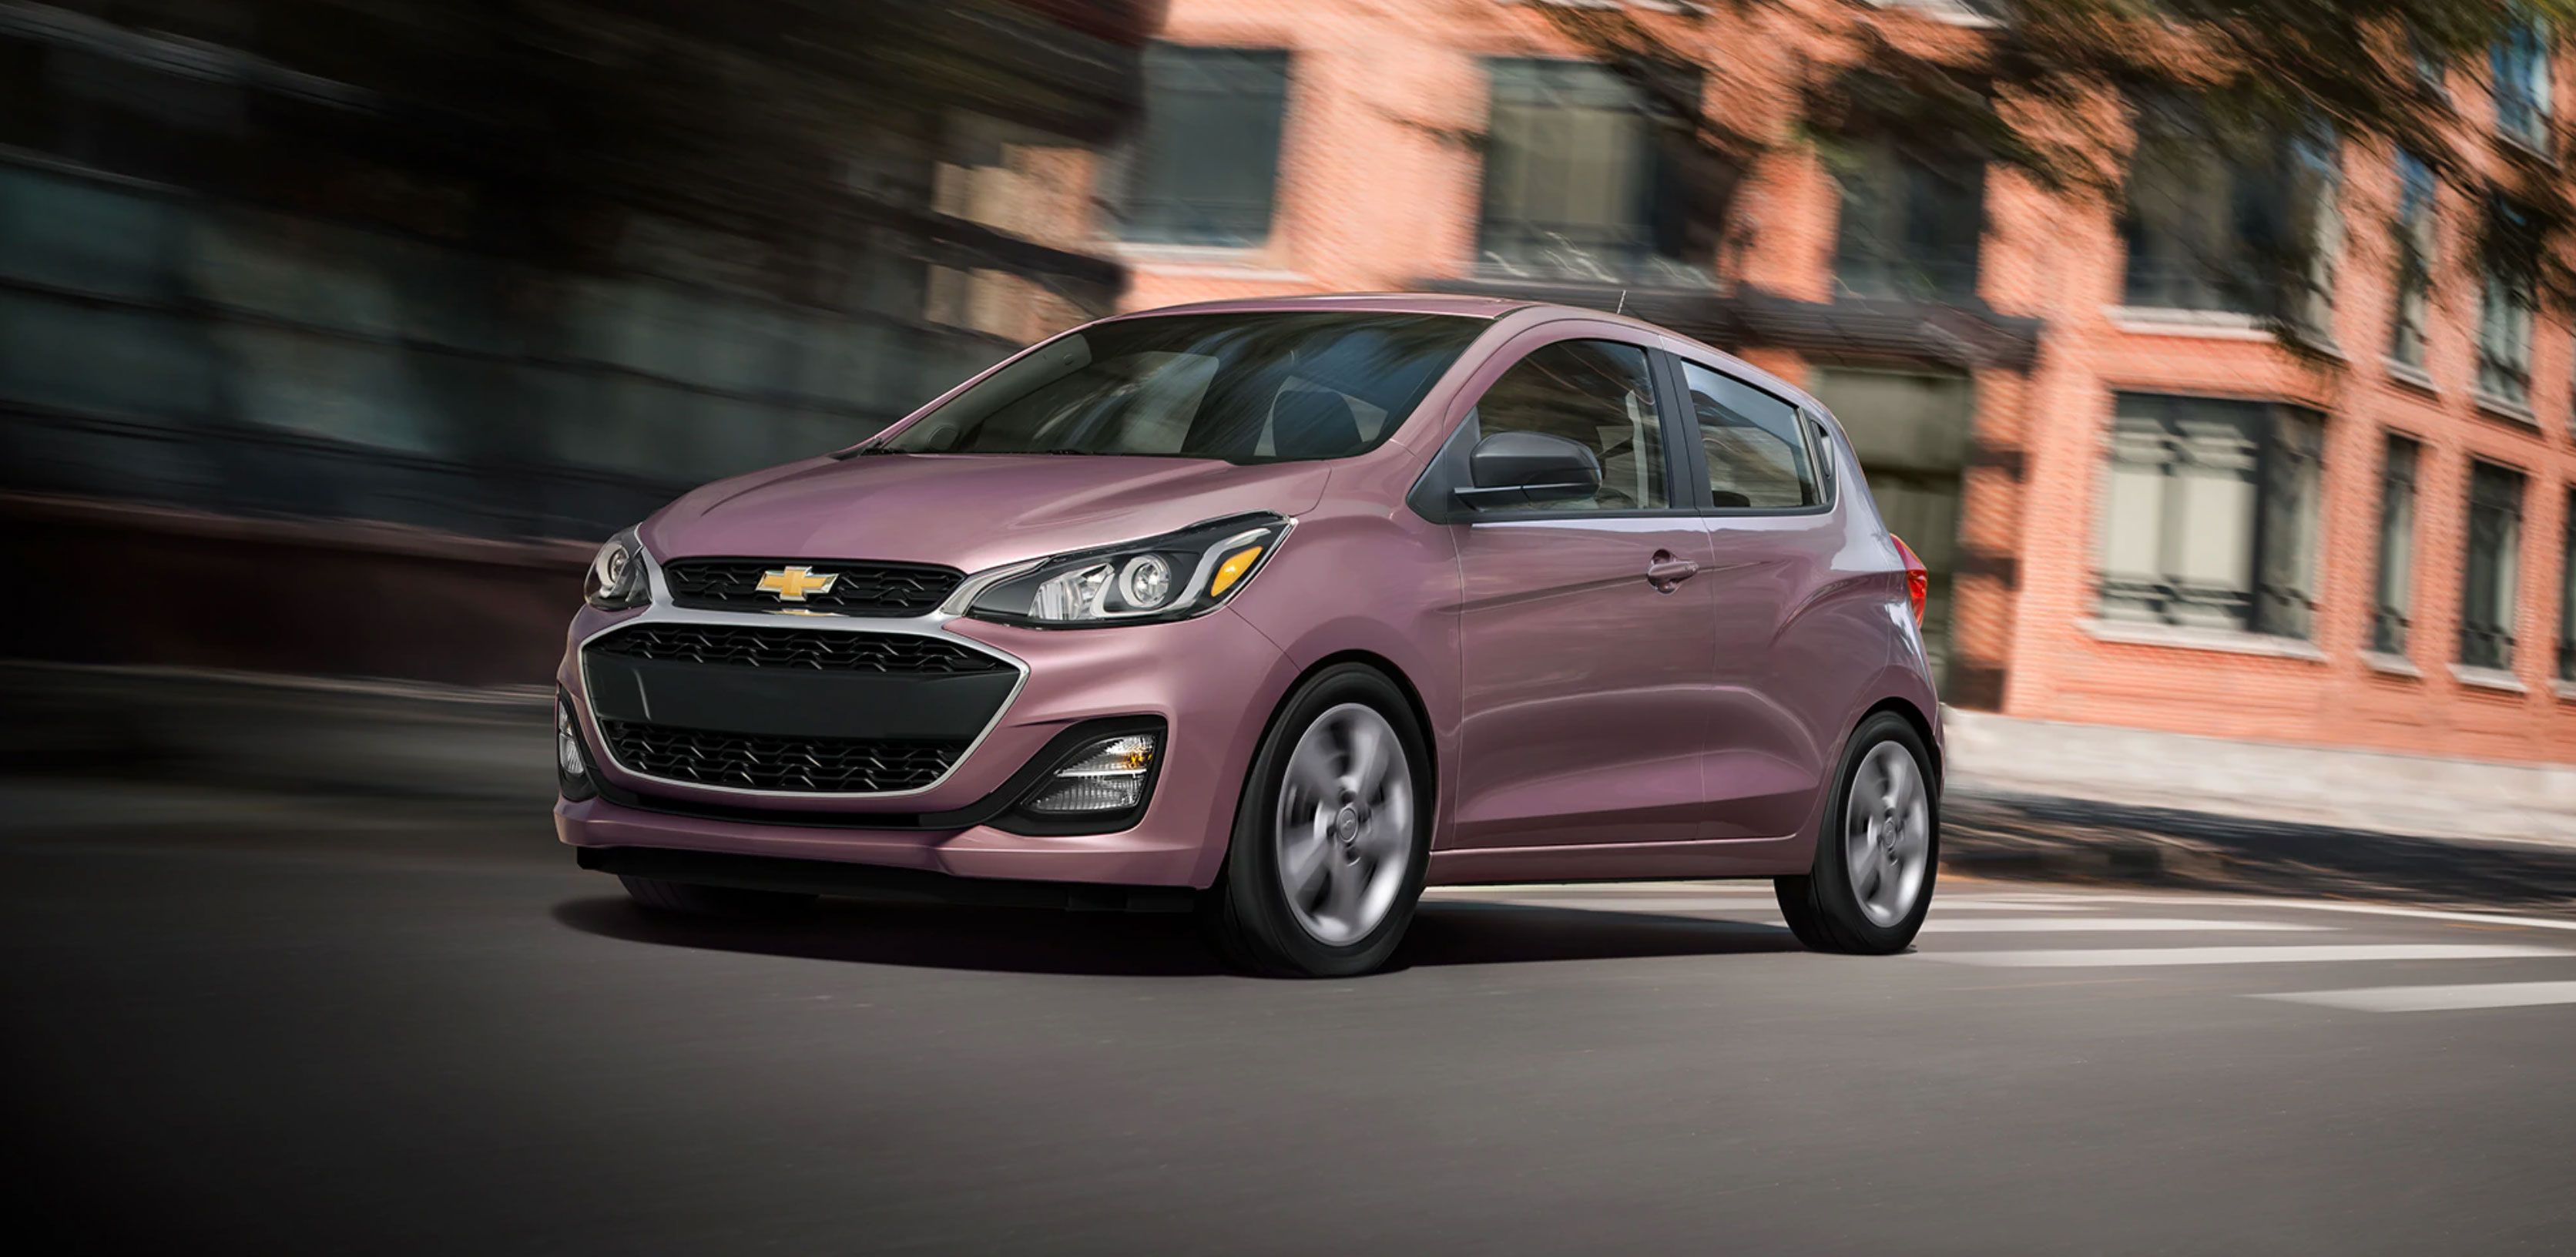 New Chevrolet Spark Photos Prices And Specs in Saudi Arabia